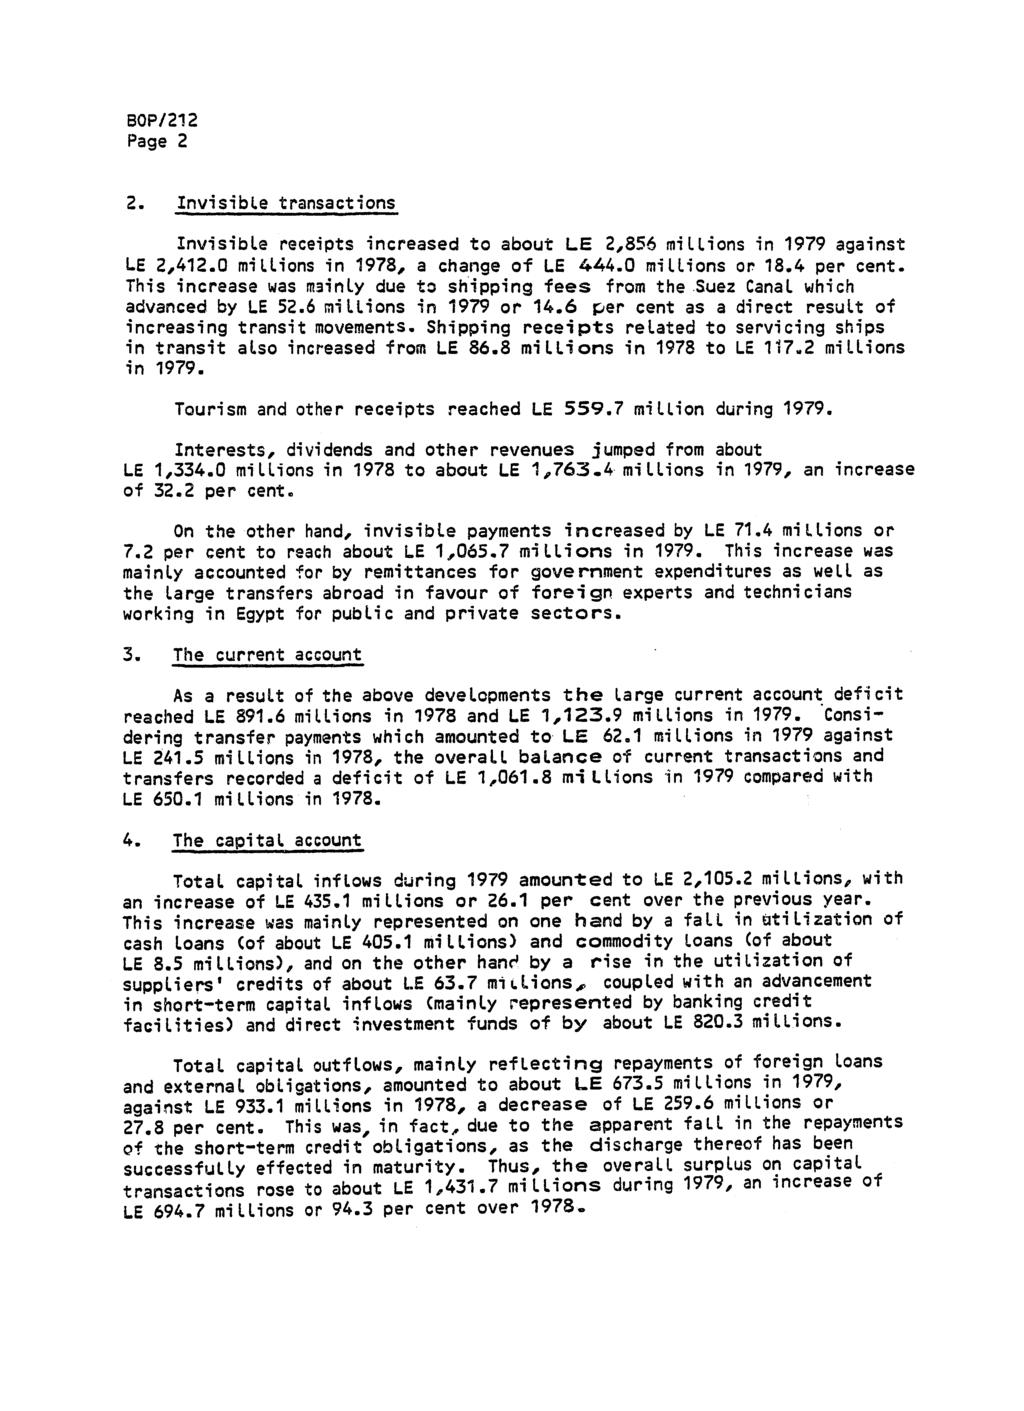 BOP/212 Page 2 2. Invisible transactions Invisible receipts increased to about LE 2,856 millions in 1979 against LE 2,412.0 millions in 1978, a change of LE 444.0 millions or 18.4 per cent.